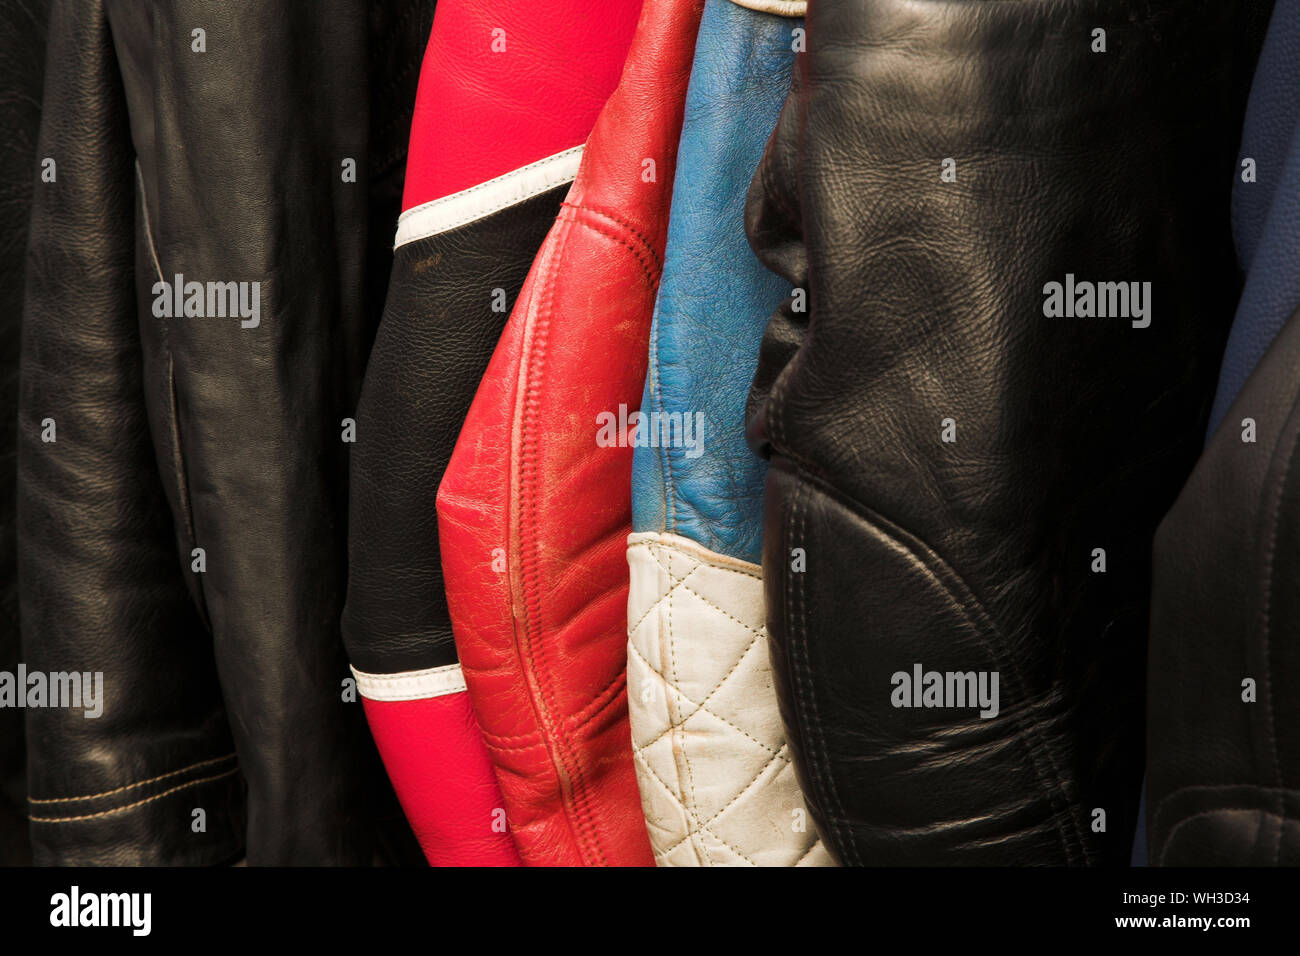 Close-up Of Colorful Leather Jackets Hanging In Store Stock Photo